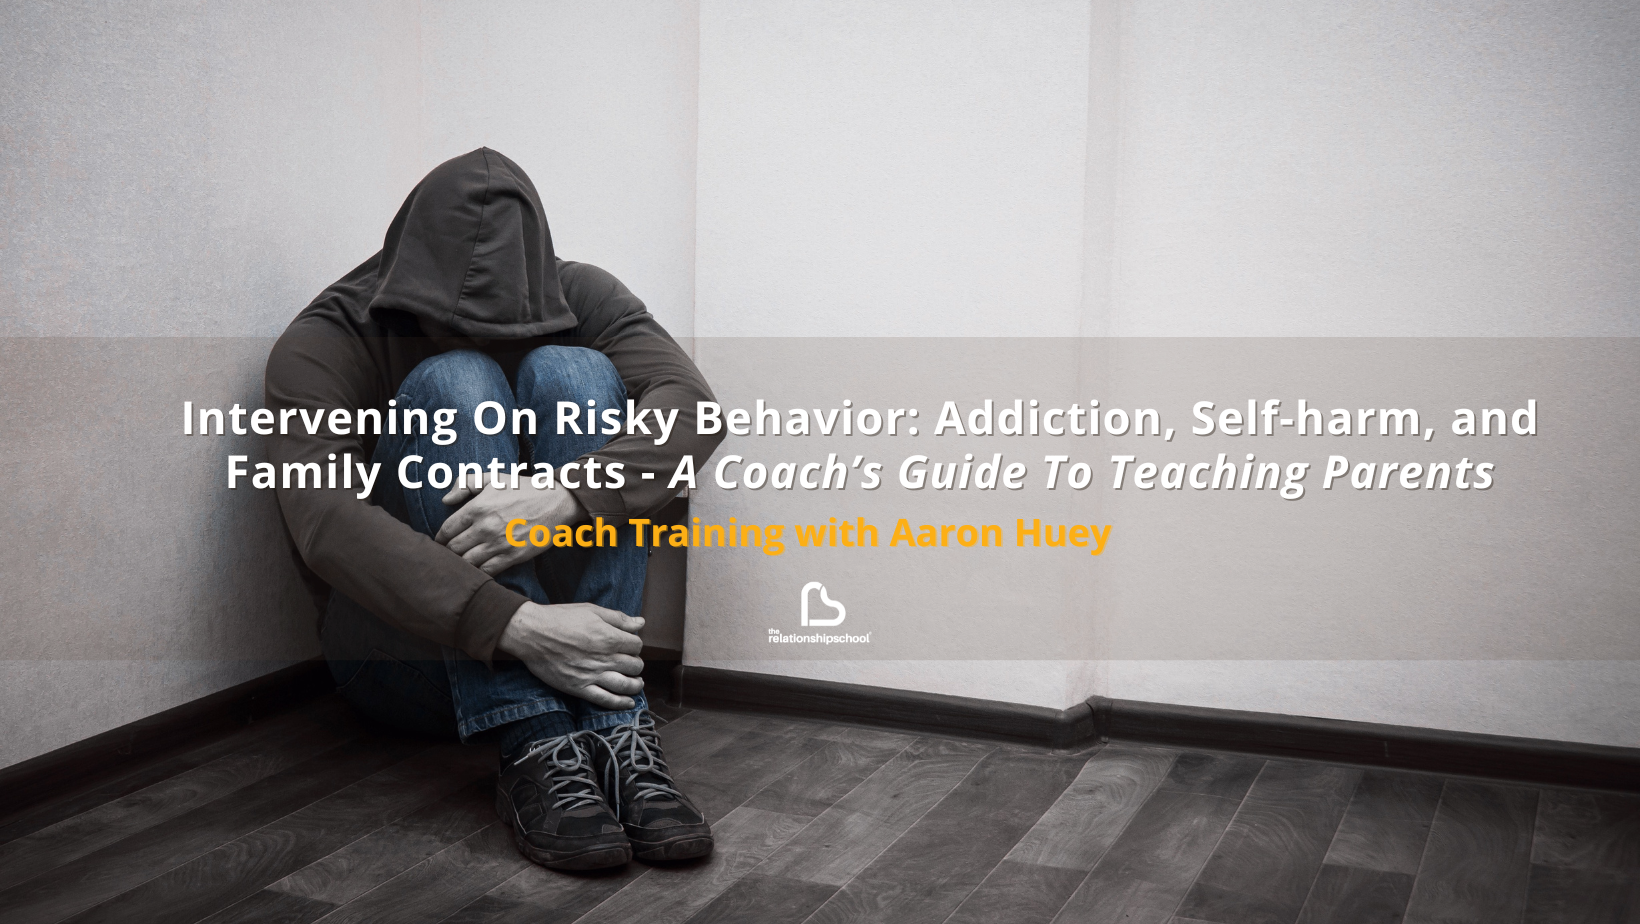 Intervening On Risky Behavior: Addiction, Self-harm, and Family Contracts – A Coach’s Guide To Teaching Parents with Aaron Huey